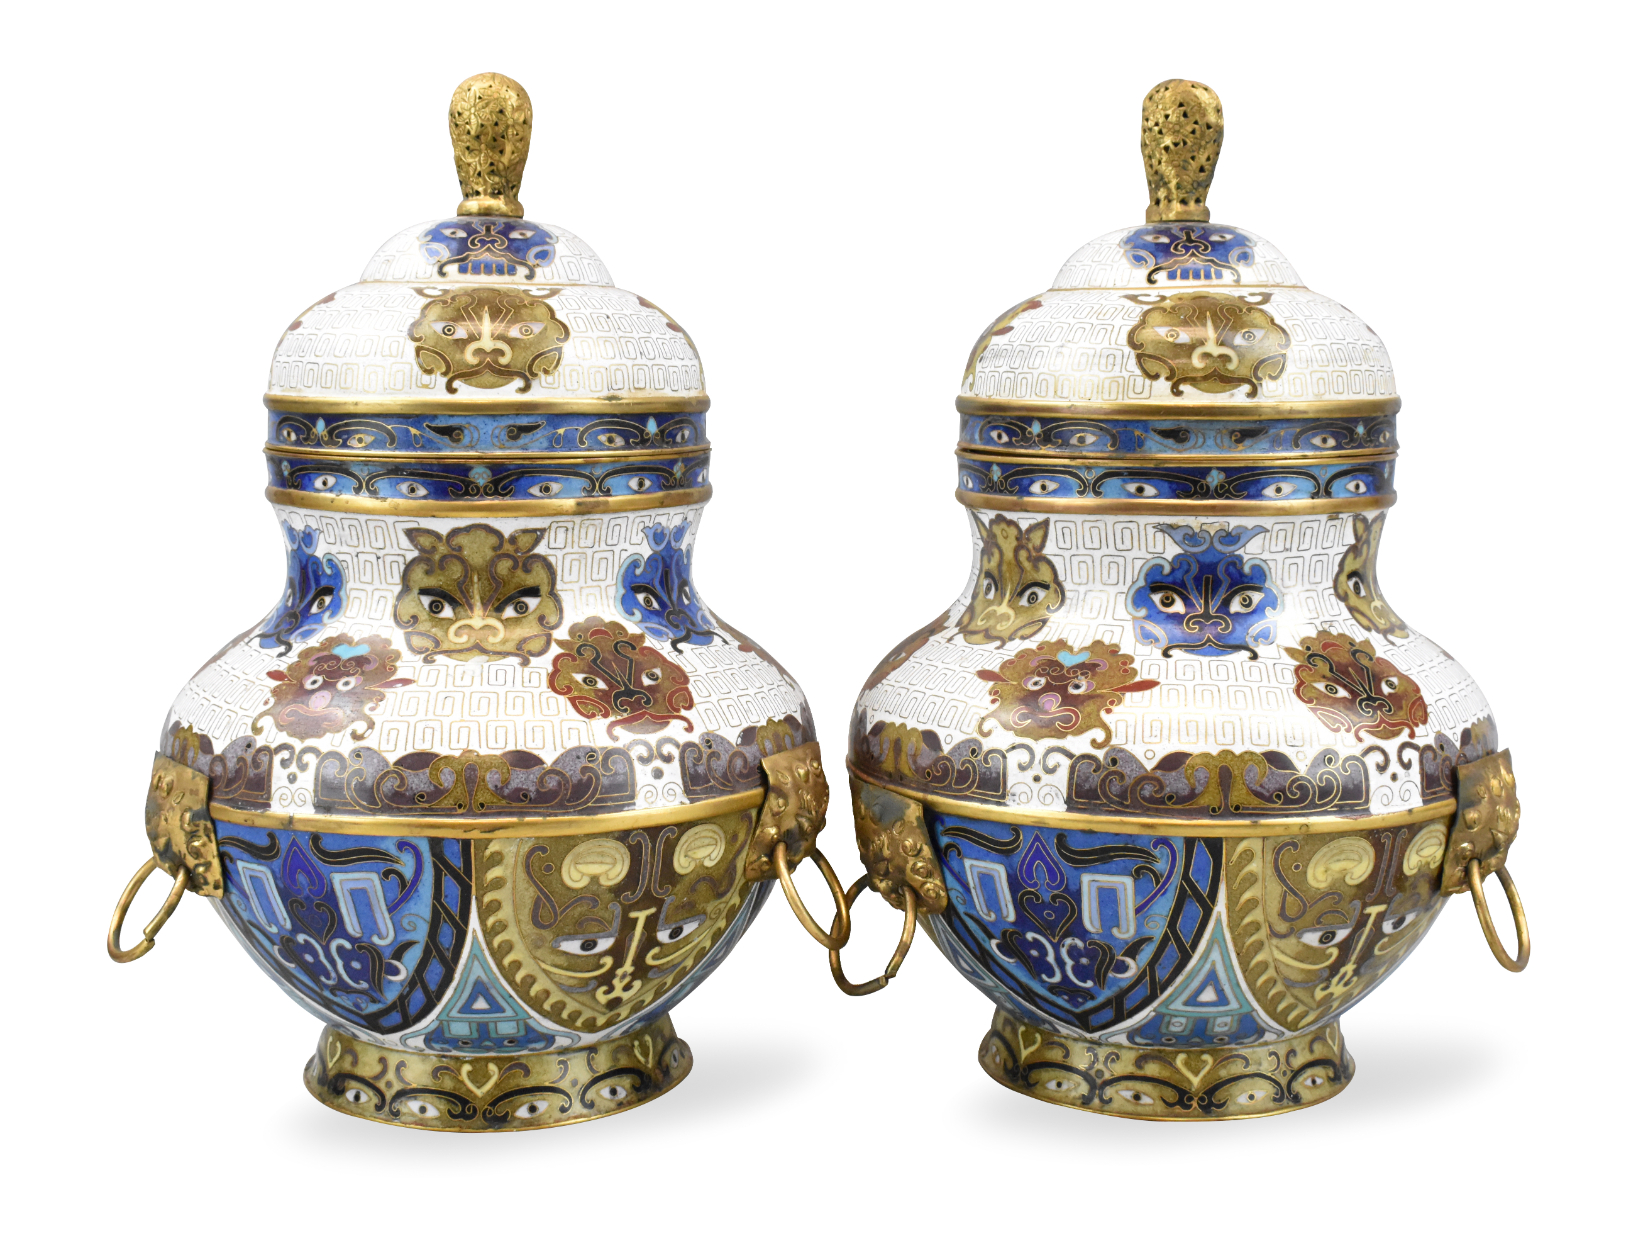 PAIR OF CHINESE CLOISONNE JARS 33a10c